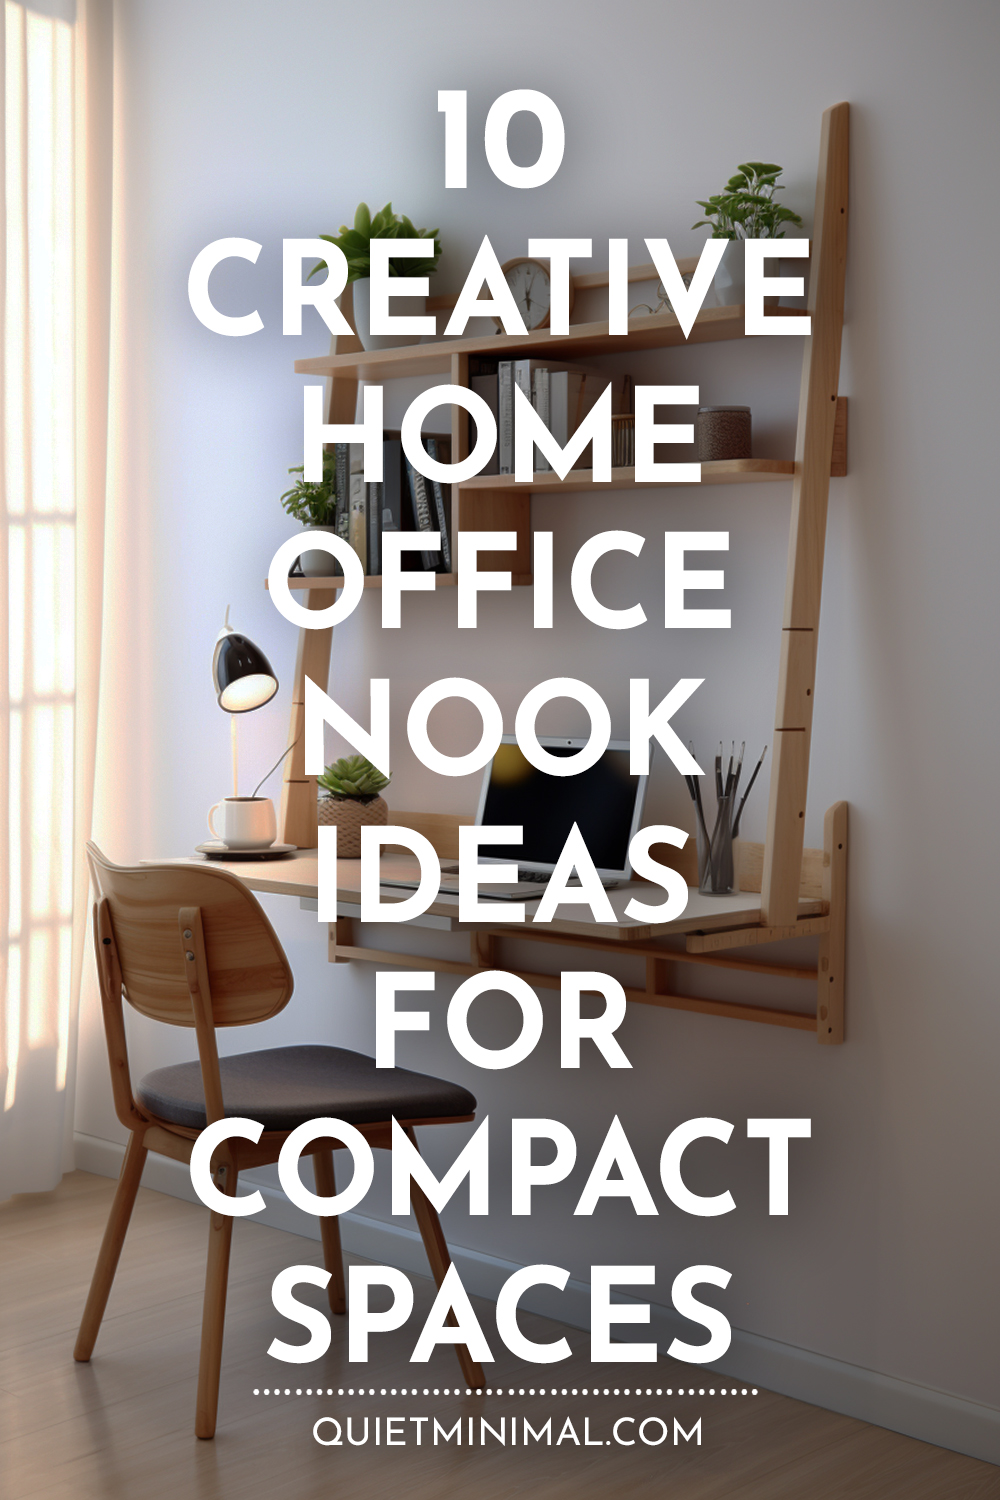 10 creative home office nook ideas for optimizing small spaces.